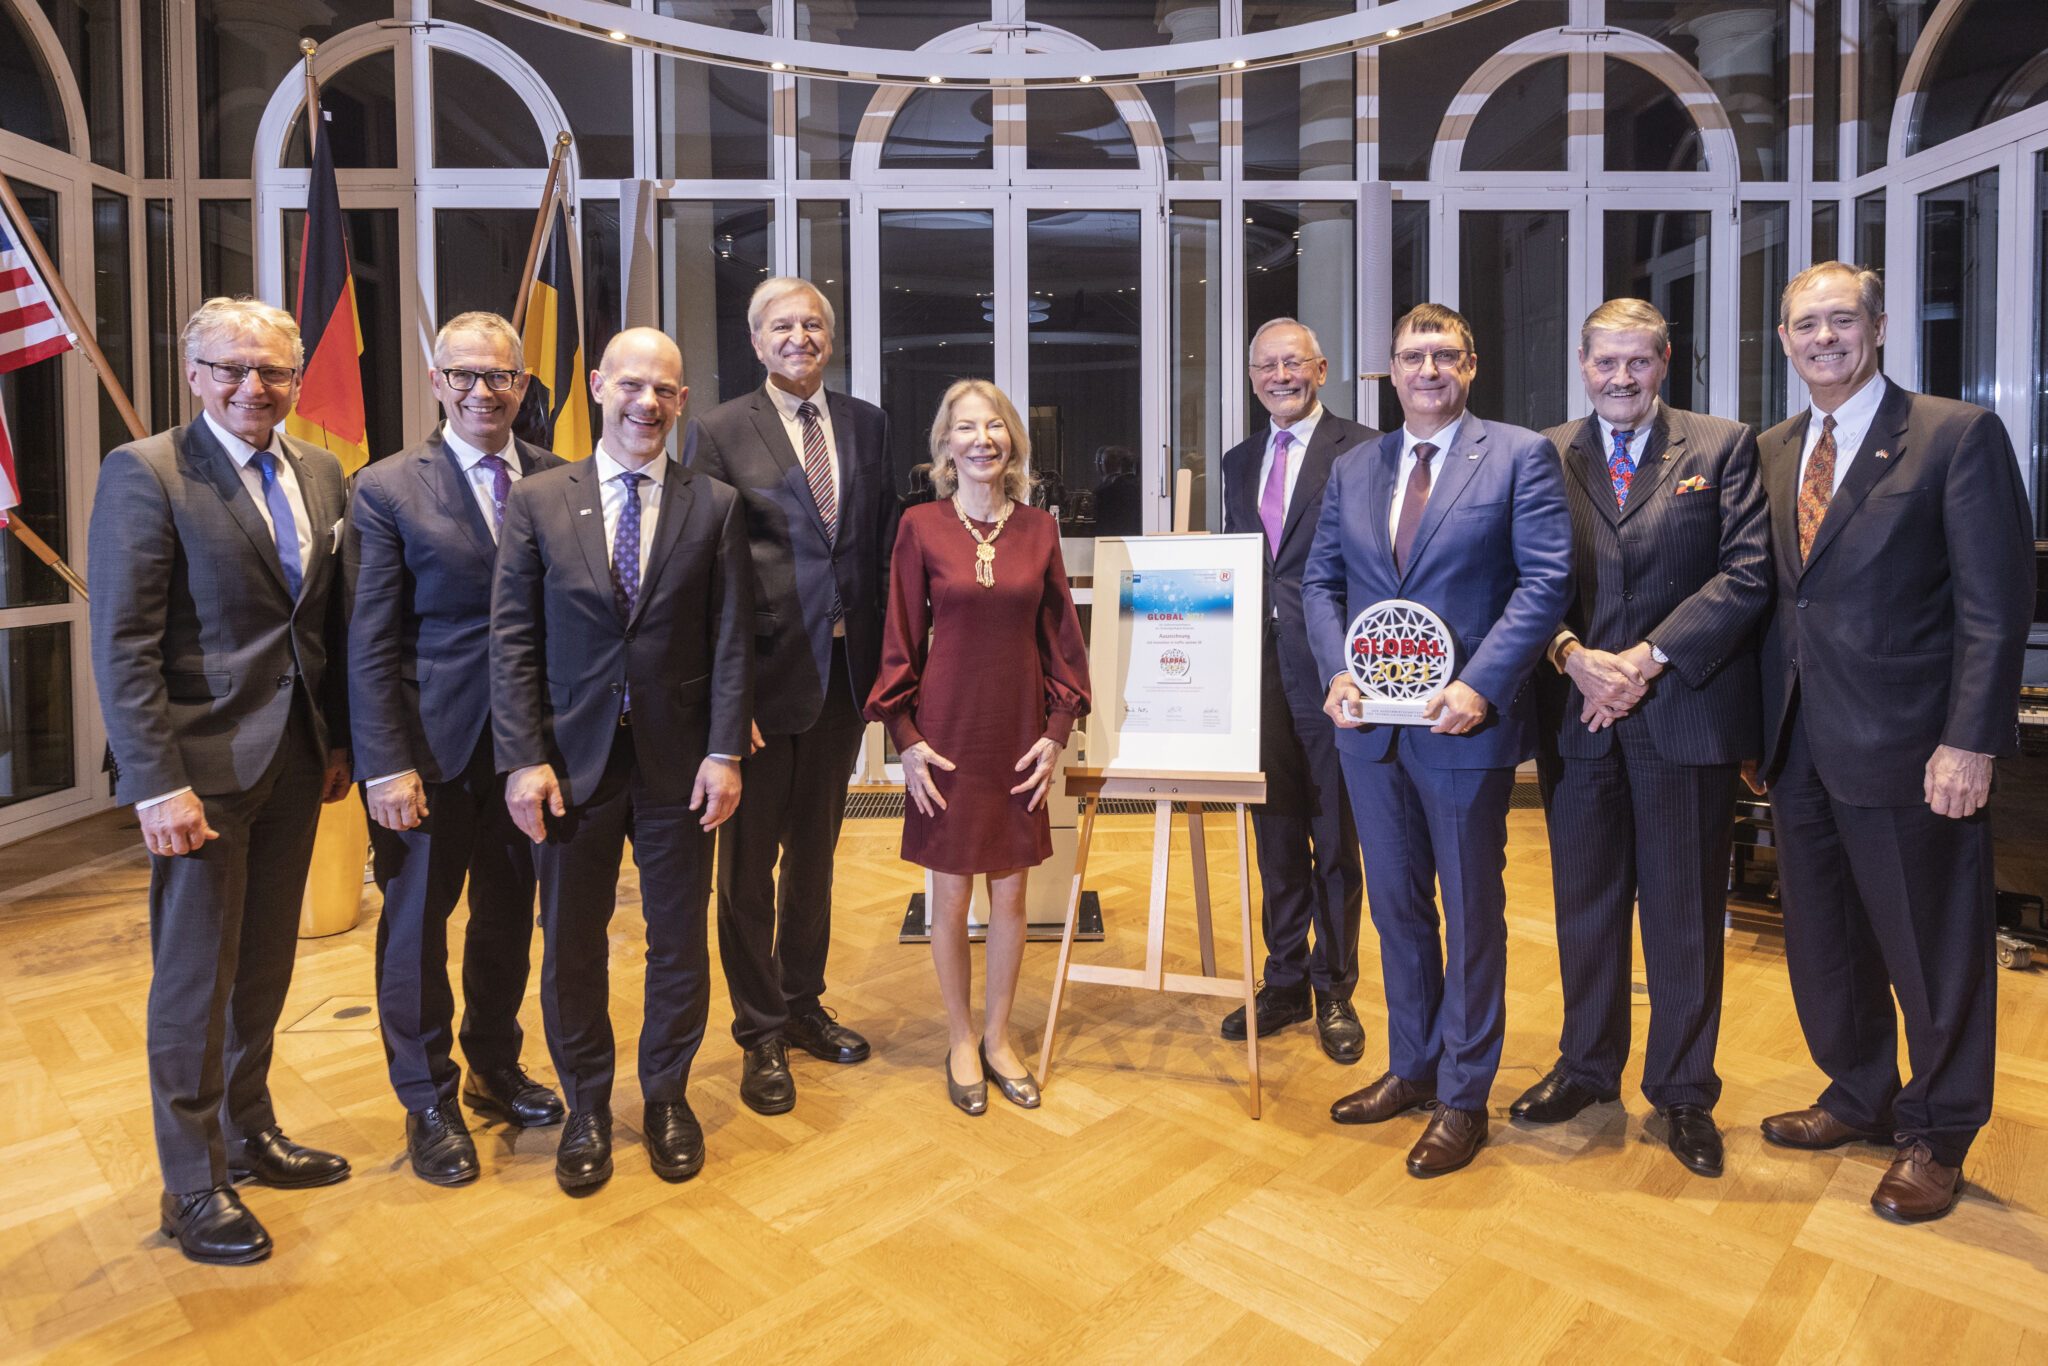 US Ambassador Amy Gutmann presented the Global 2023 to Dr. Jürgen Greschner (3rd from right) from the INIT Group (Photo: Fabry)